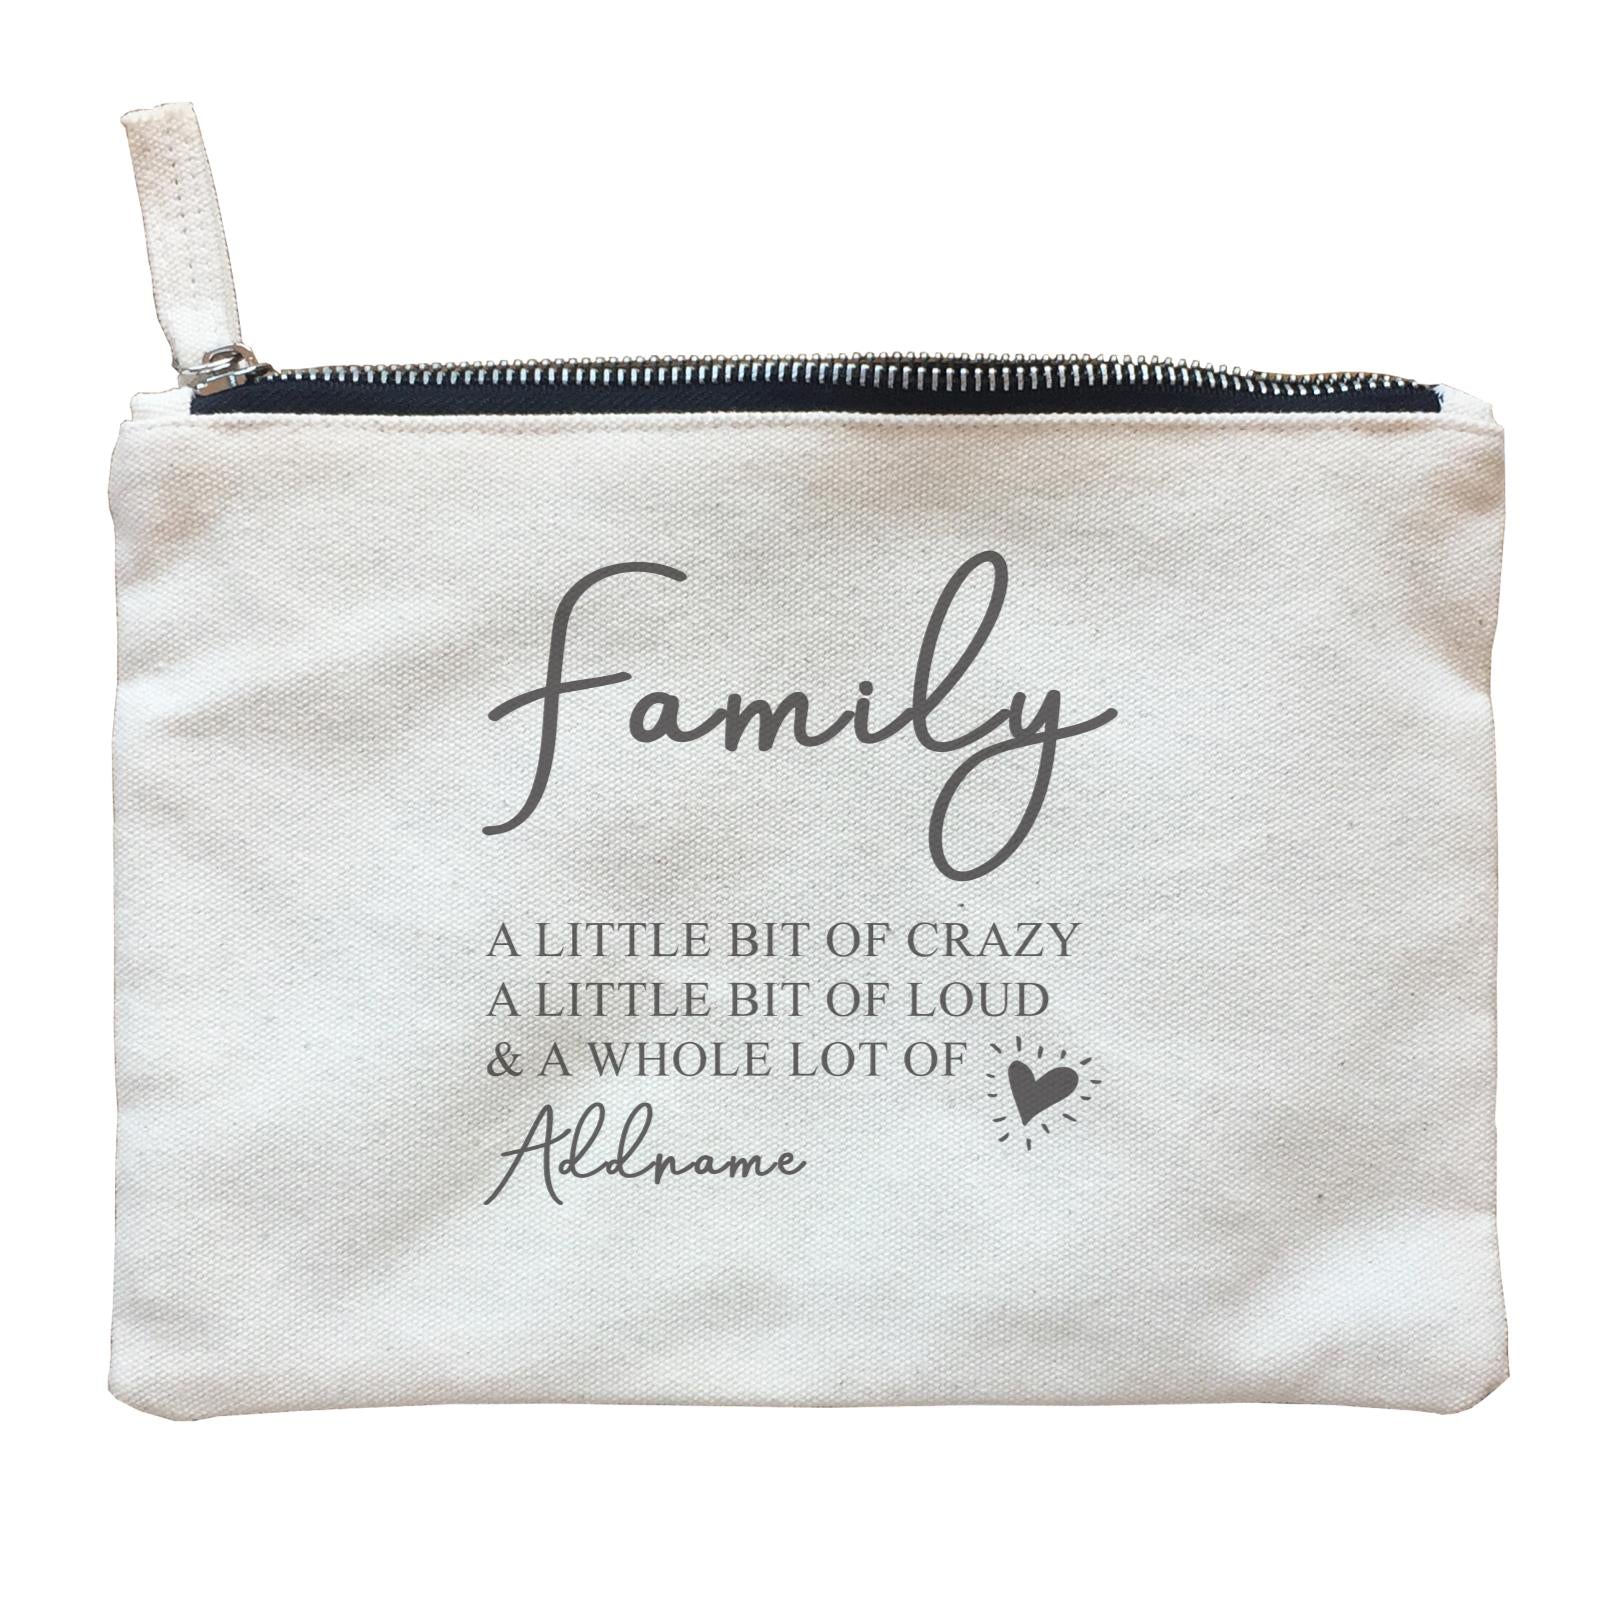 Family Is Everythings Quotes Family A Whole Lot Of Love Icon Addname Zipper Pouch